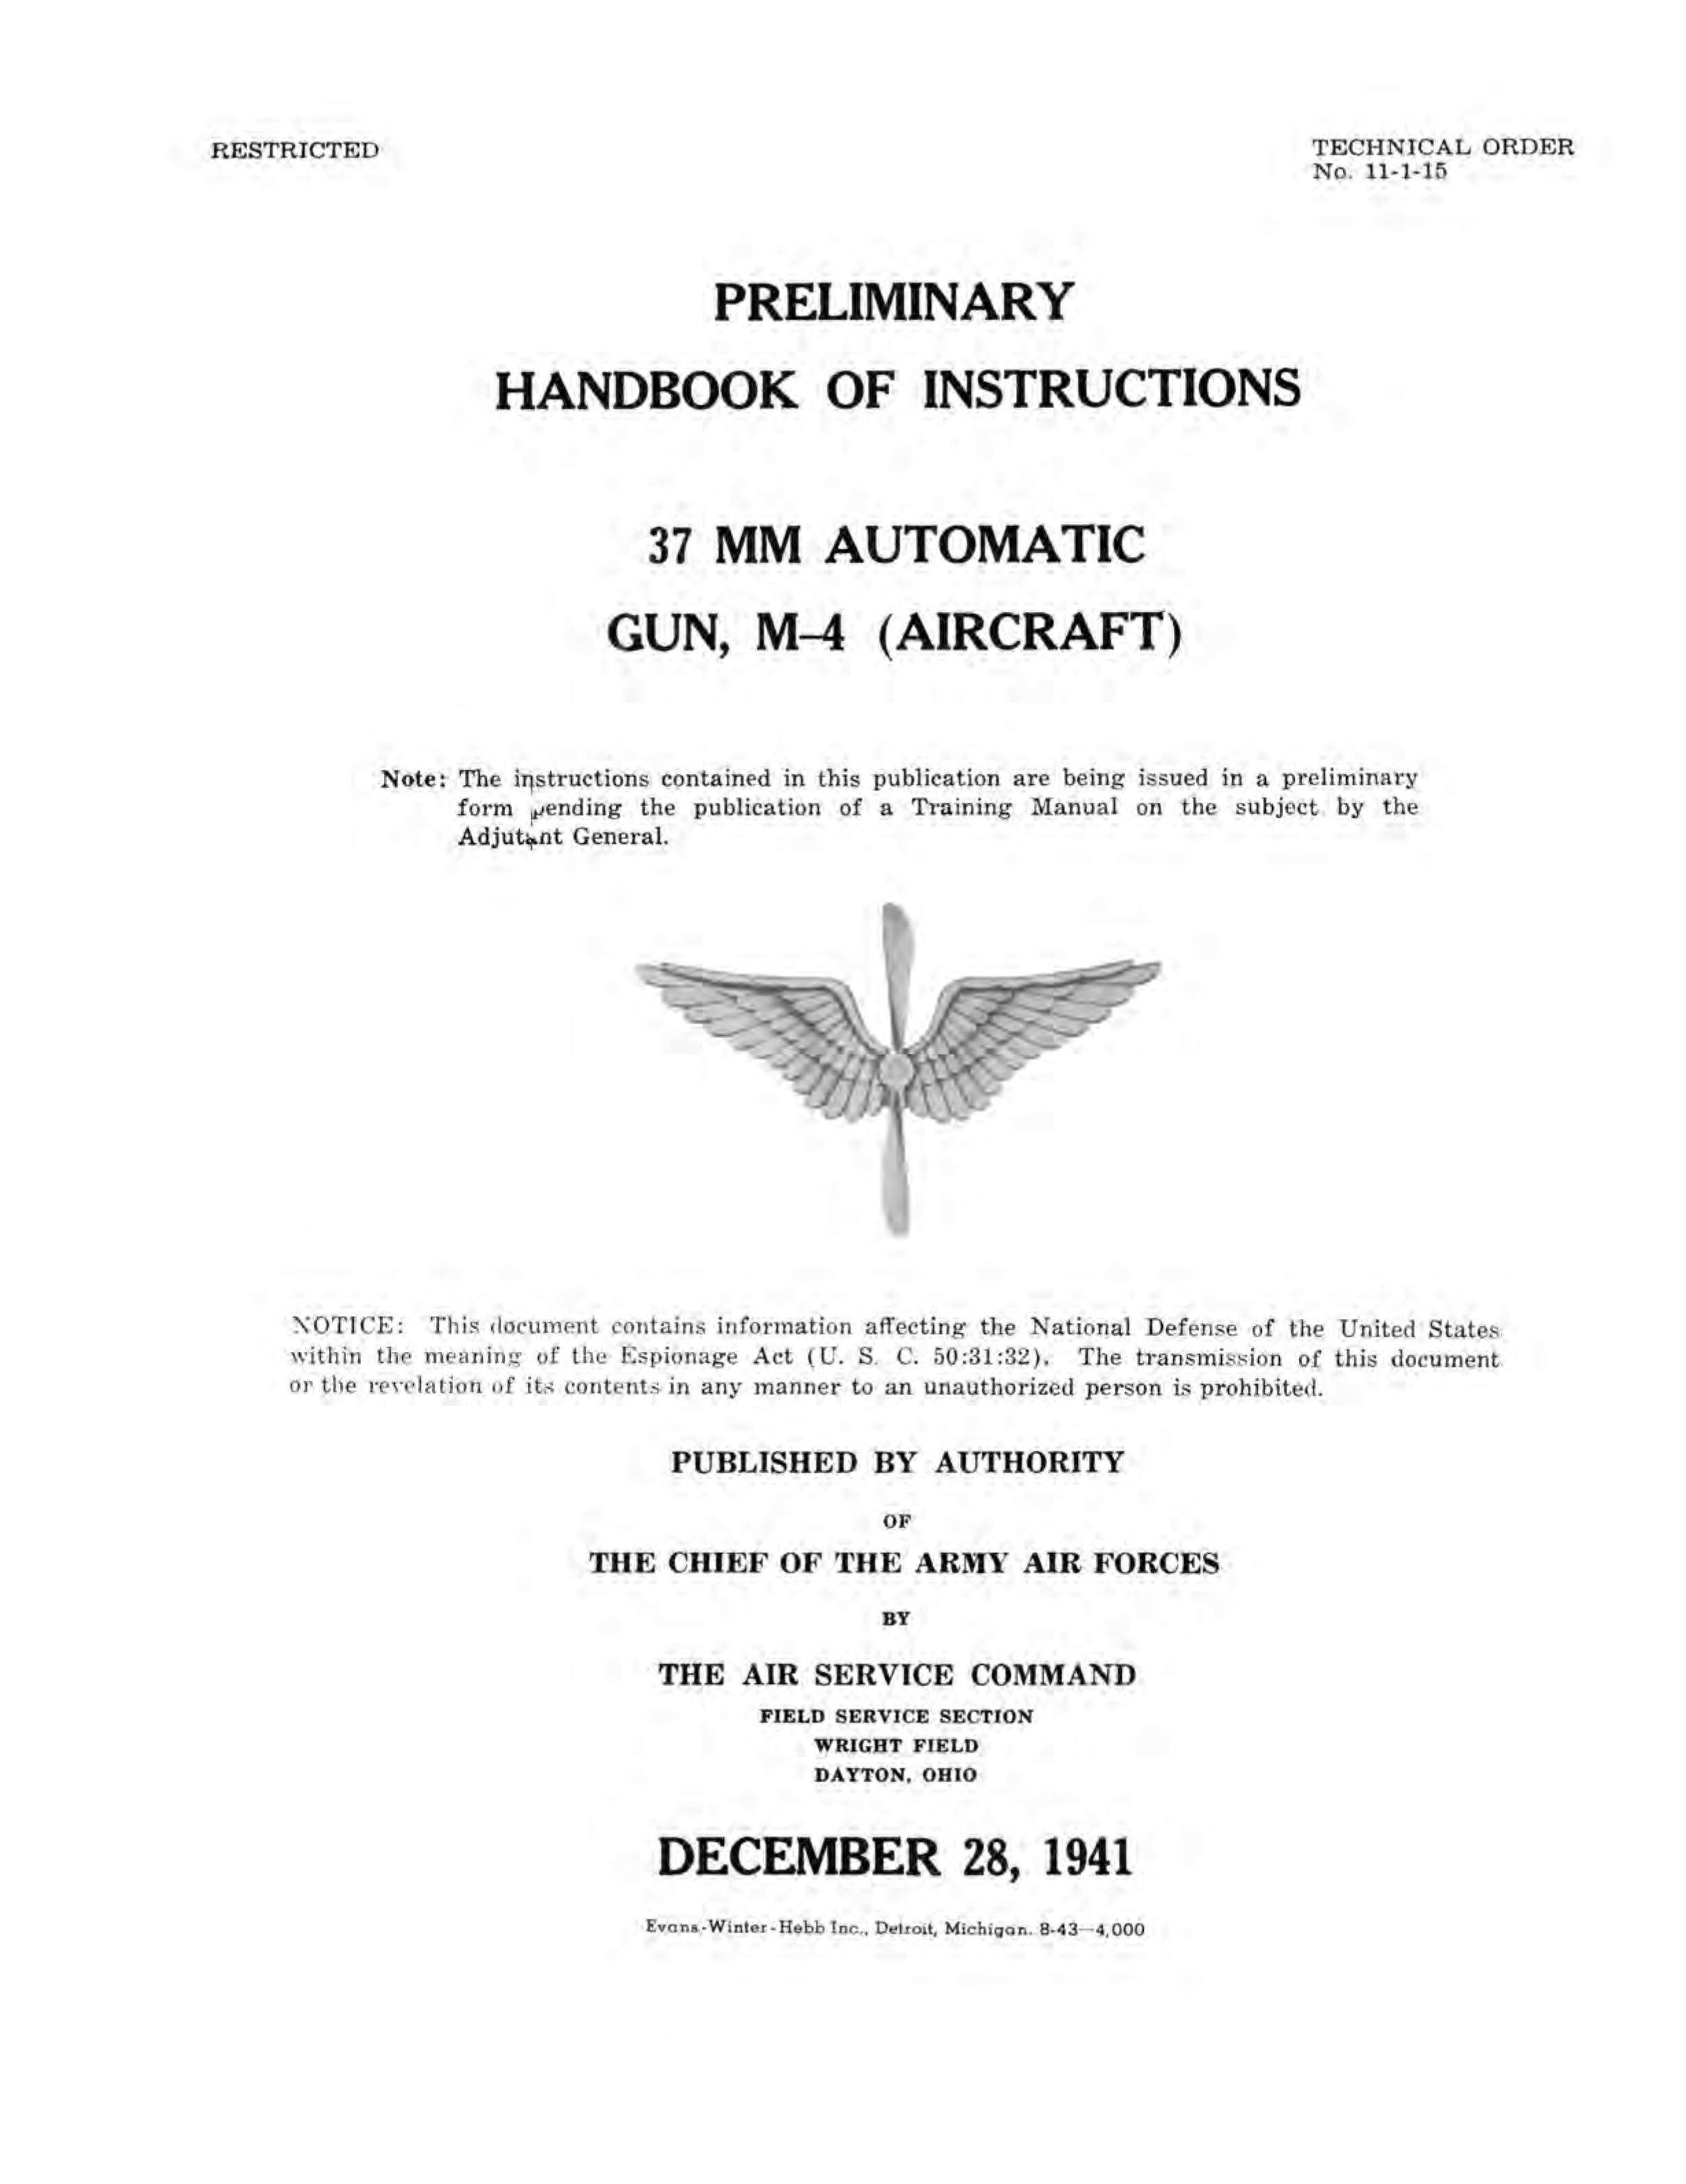 Sample page 1 from AirCorps Library document: Handbook for 37 MM Automatic Gun